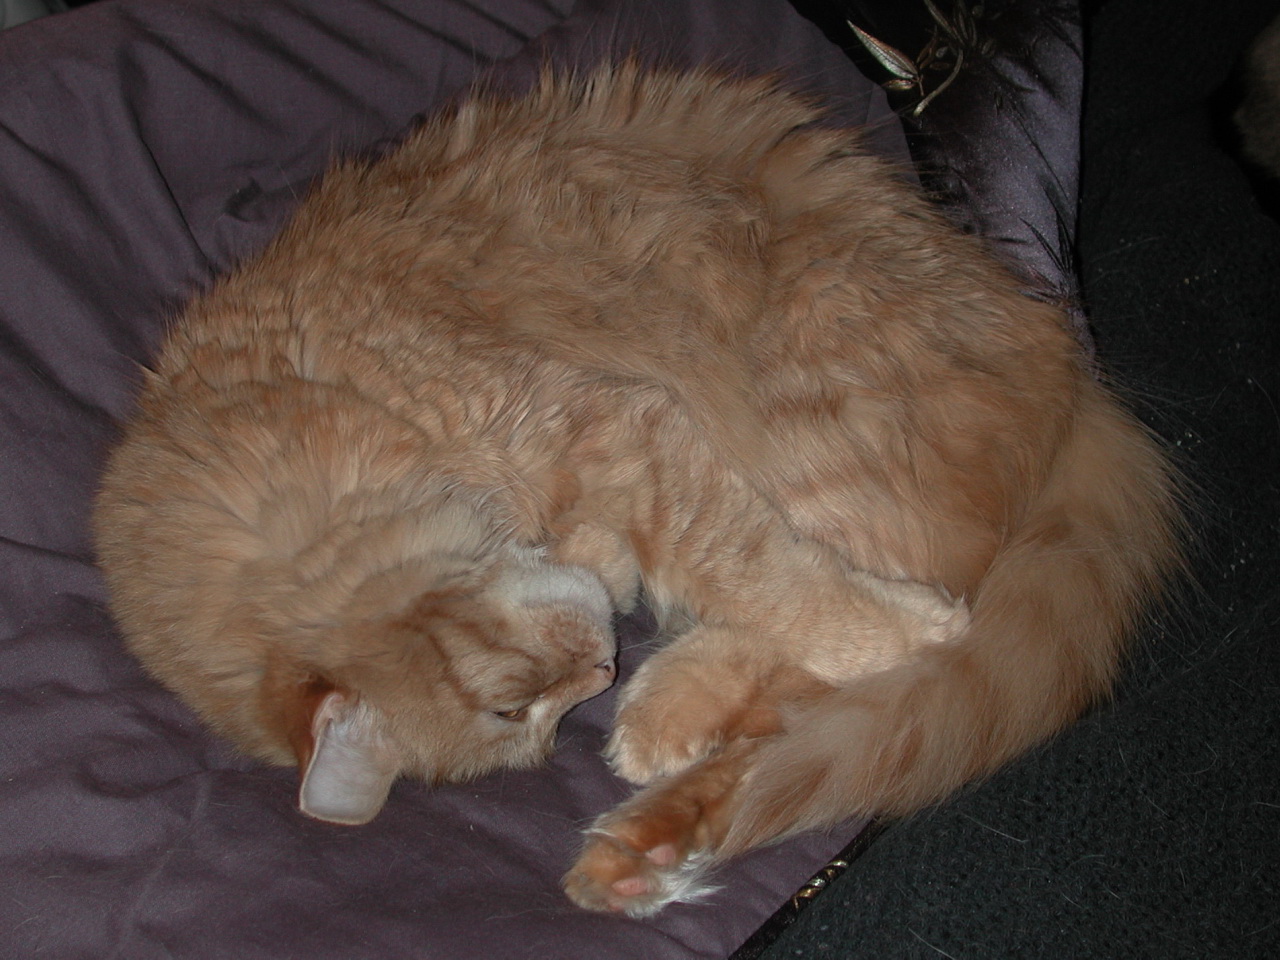 the large orange cat is sleeping on a pillow